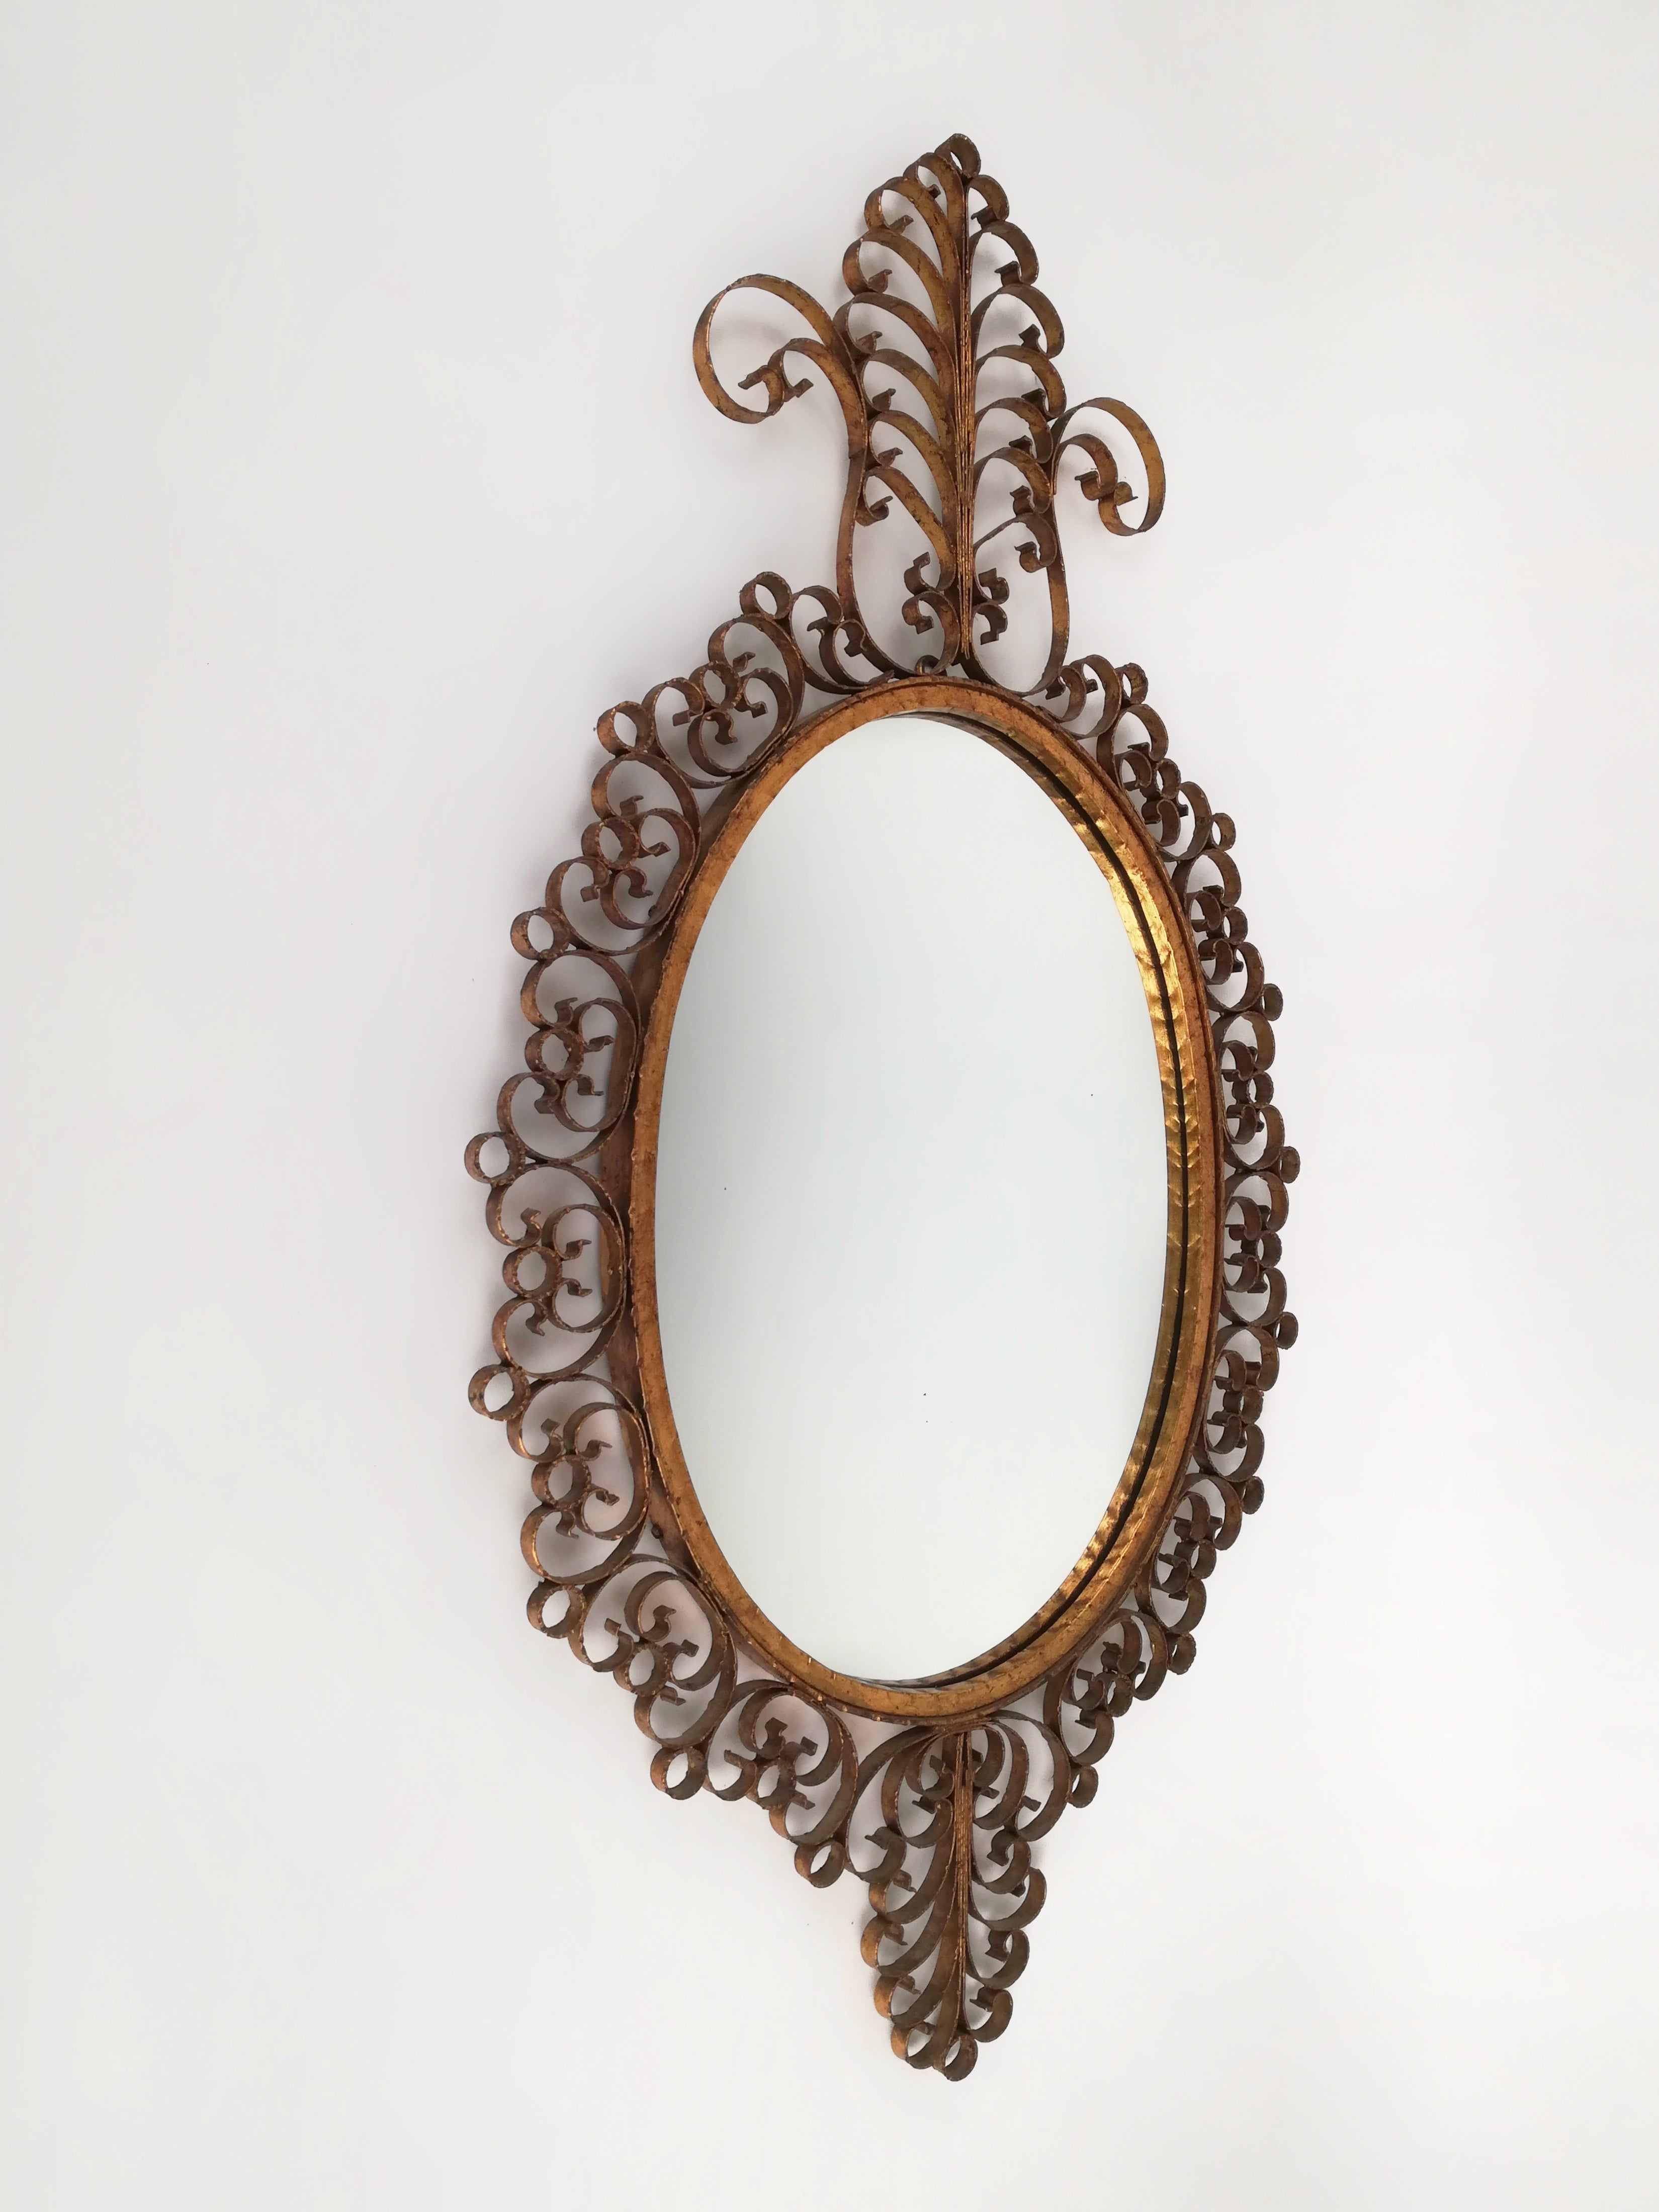 Great mirror (Height 117cm) of Baroque inspiration, handcrafted in Italy during the 1950s in the style of Pierluigi Colli products.
The wrought iron structure is decorated with gold leaf; Curls and volutes in hammered metal recall the sinuous